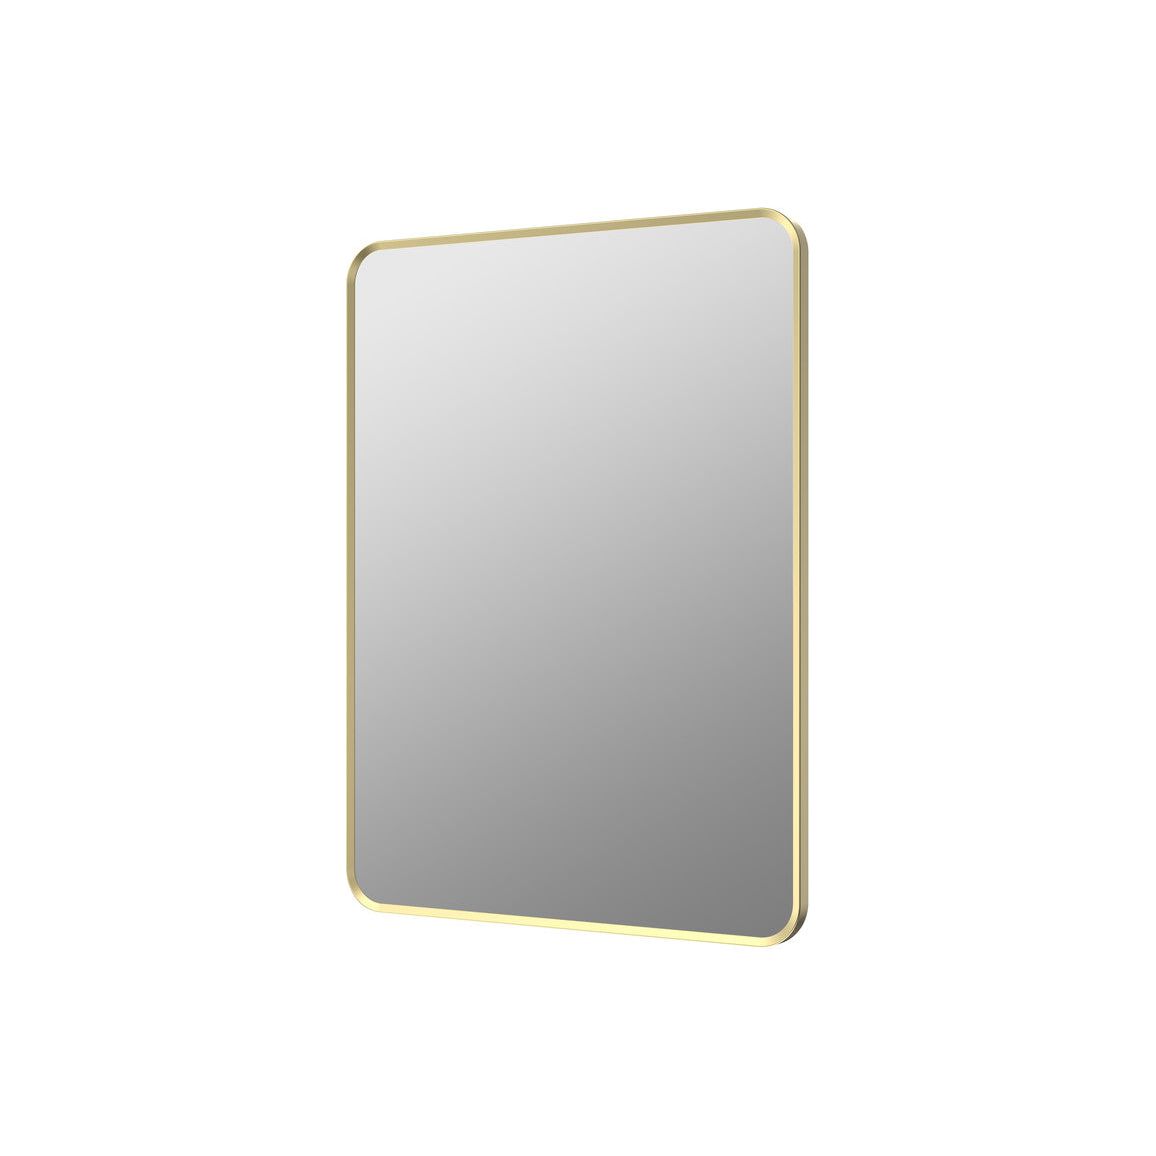 Sorrento 600x800mm Rectangle Mirror - Brushed Brass